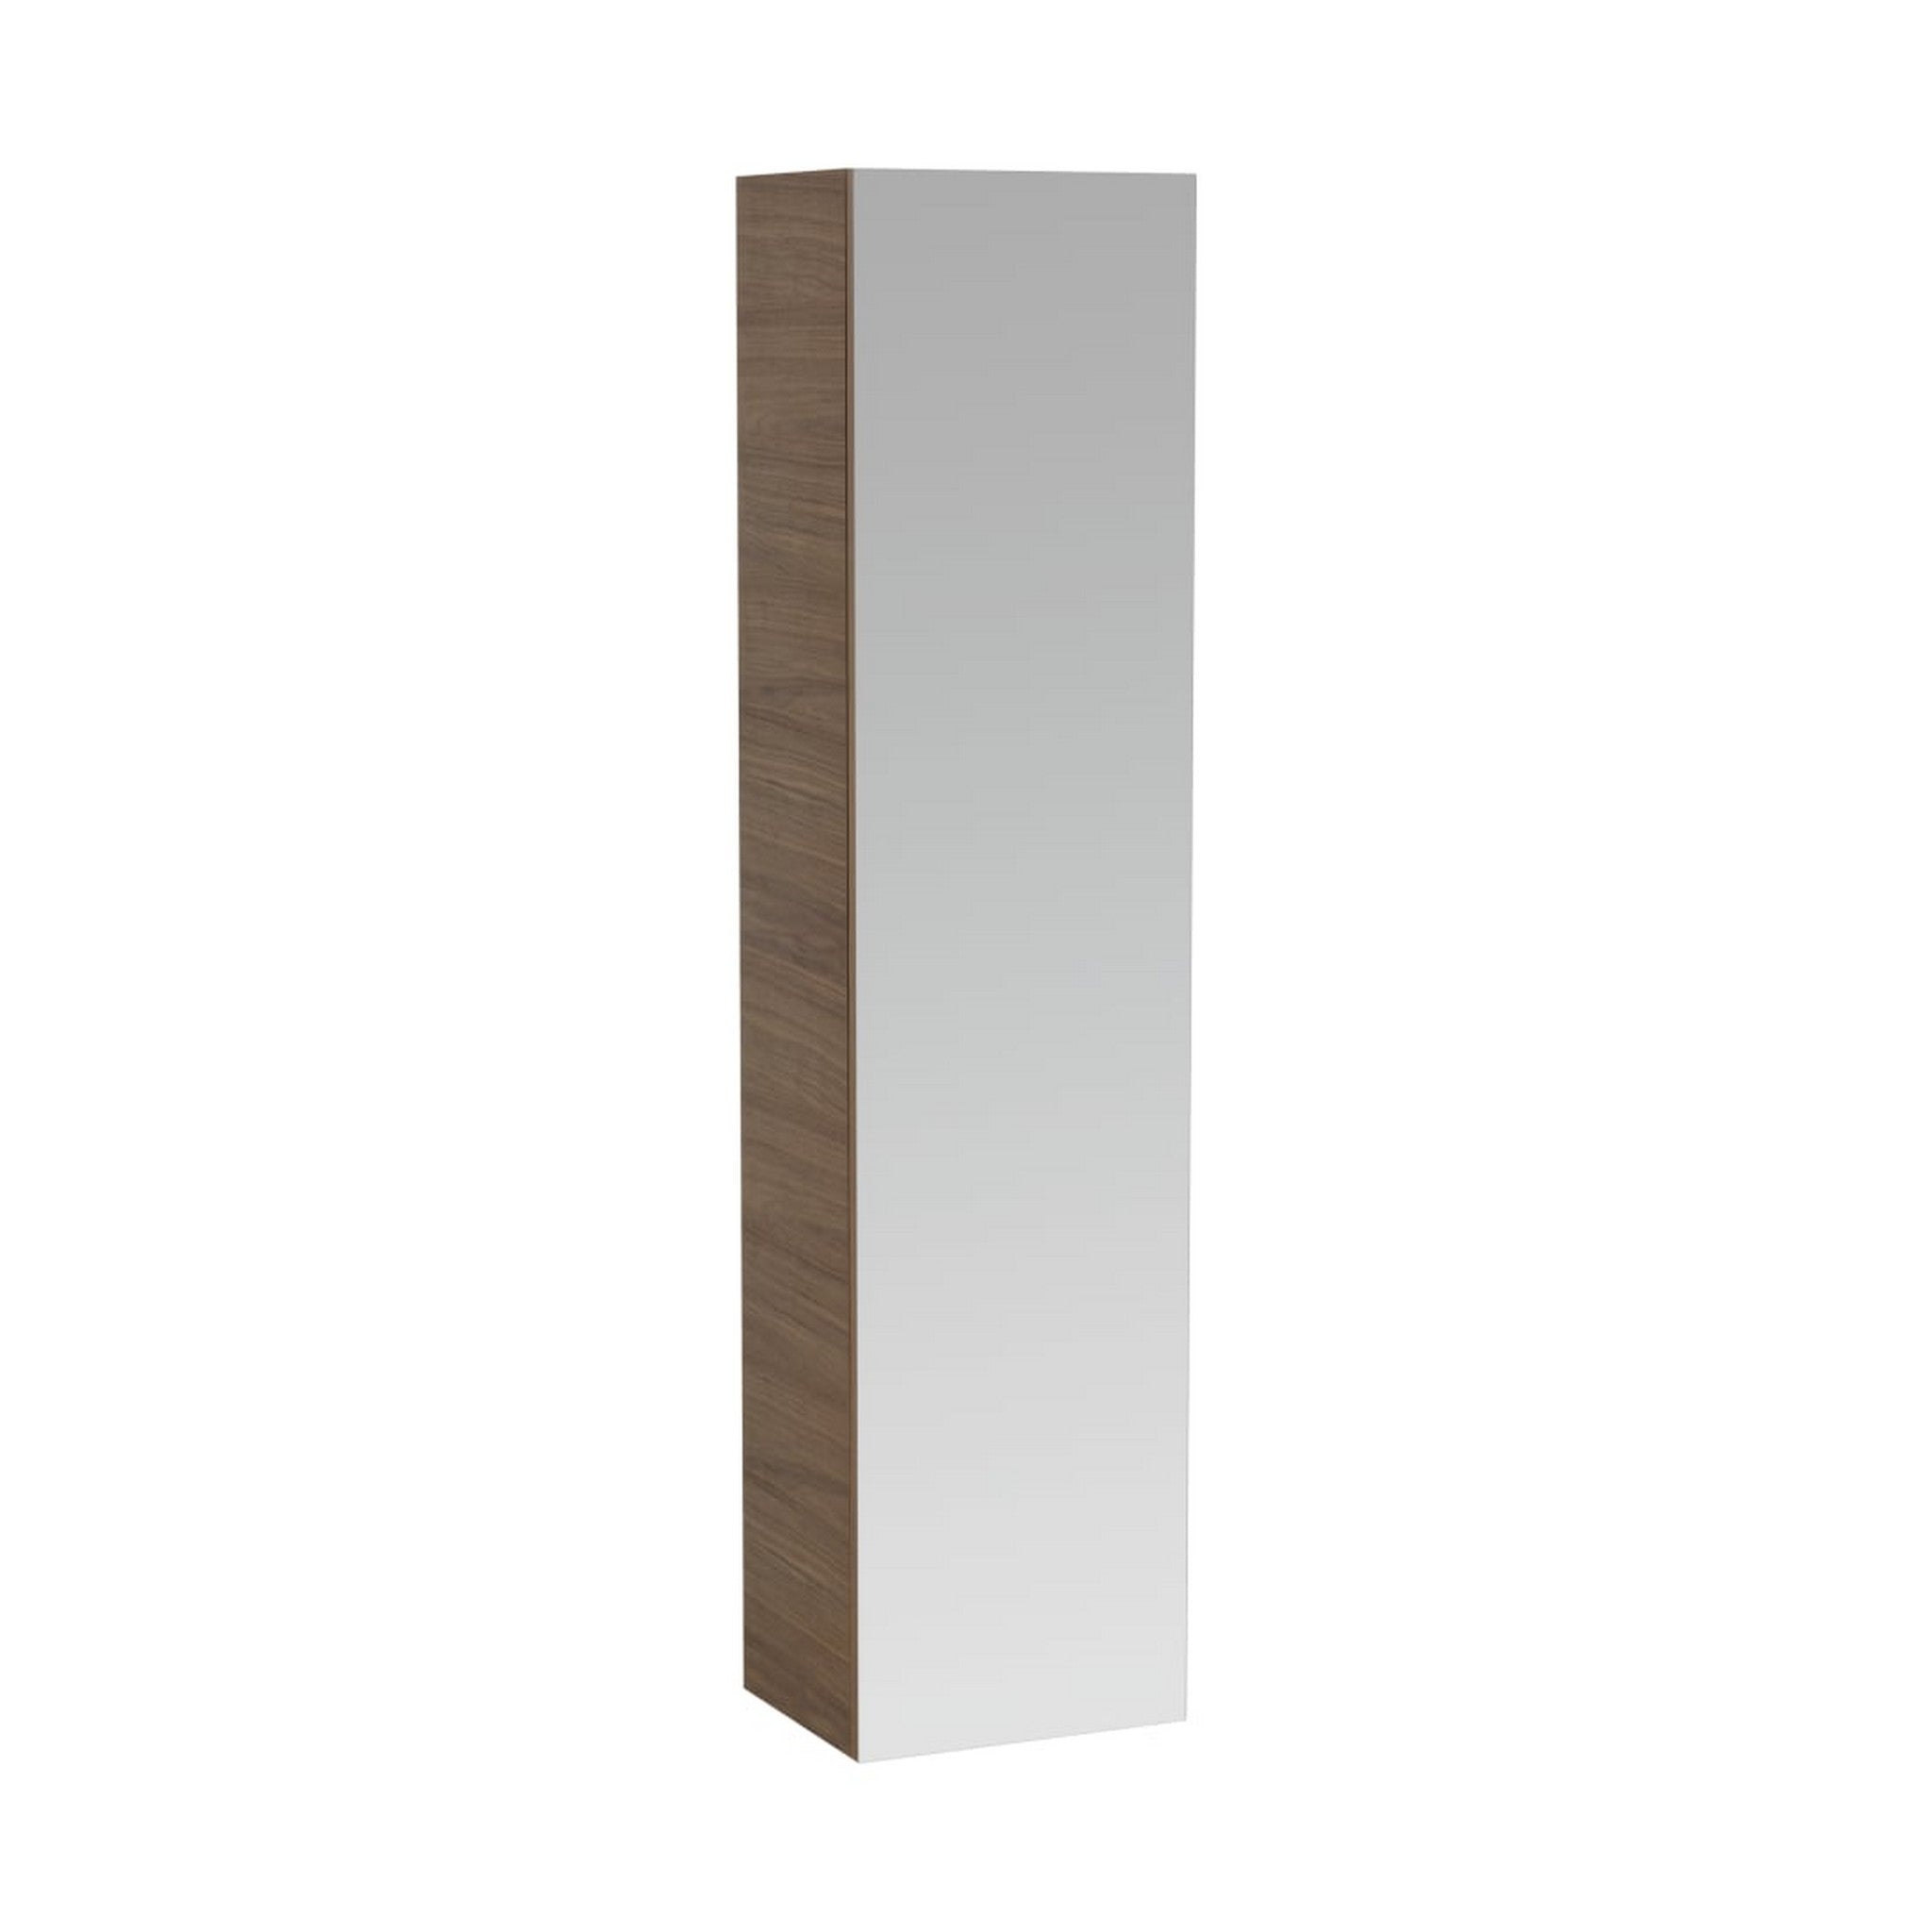 Laufen, Laufen IlBagnoAlessi 16" x 67" Walnut Wall-Mounted Right-Hinged Tall Cabinet With Mirrored Door and 4 Glass Shelves